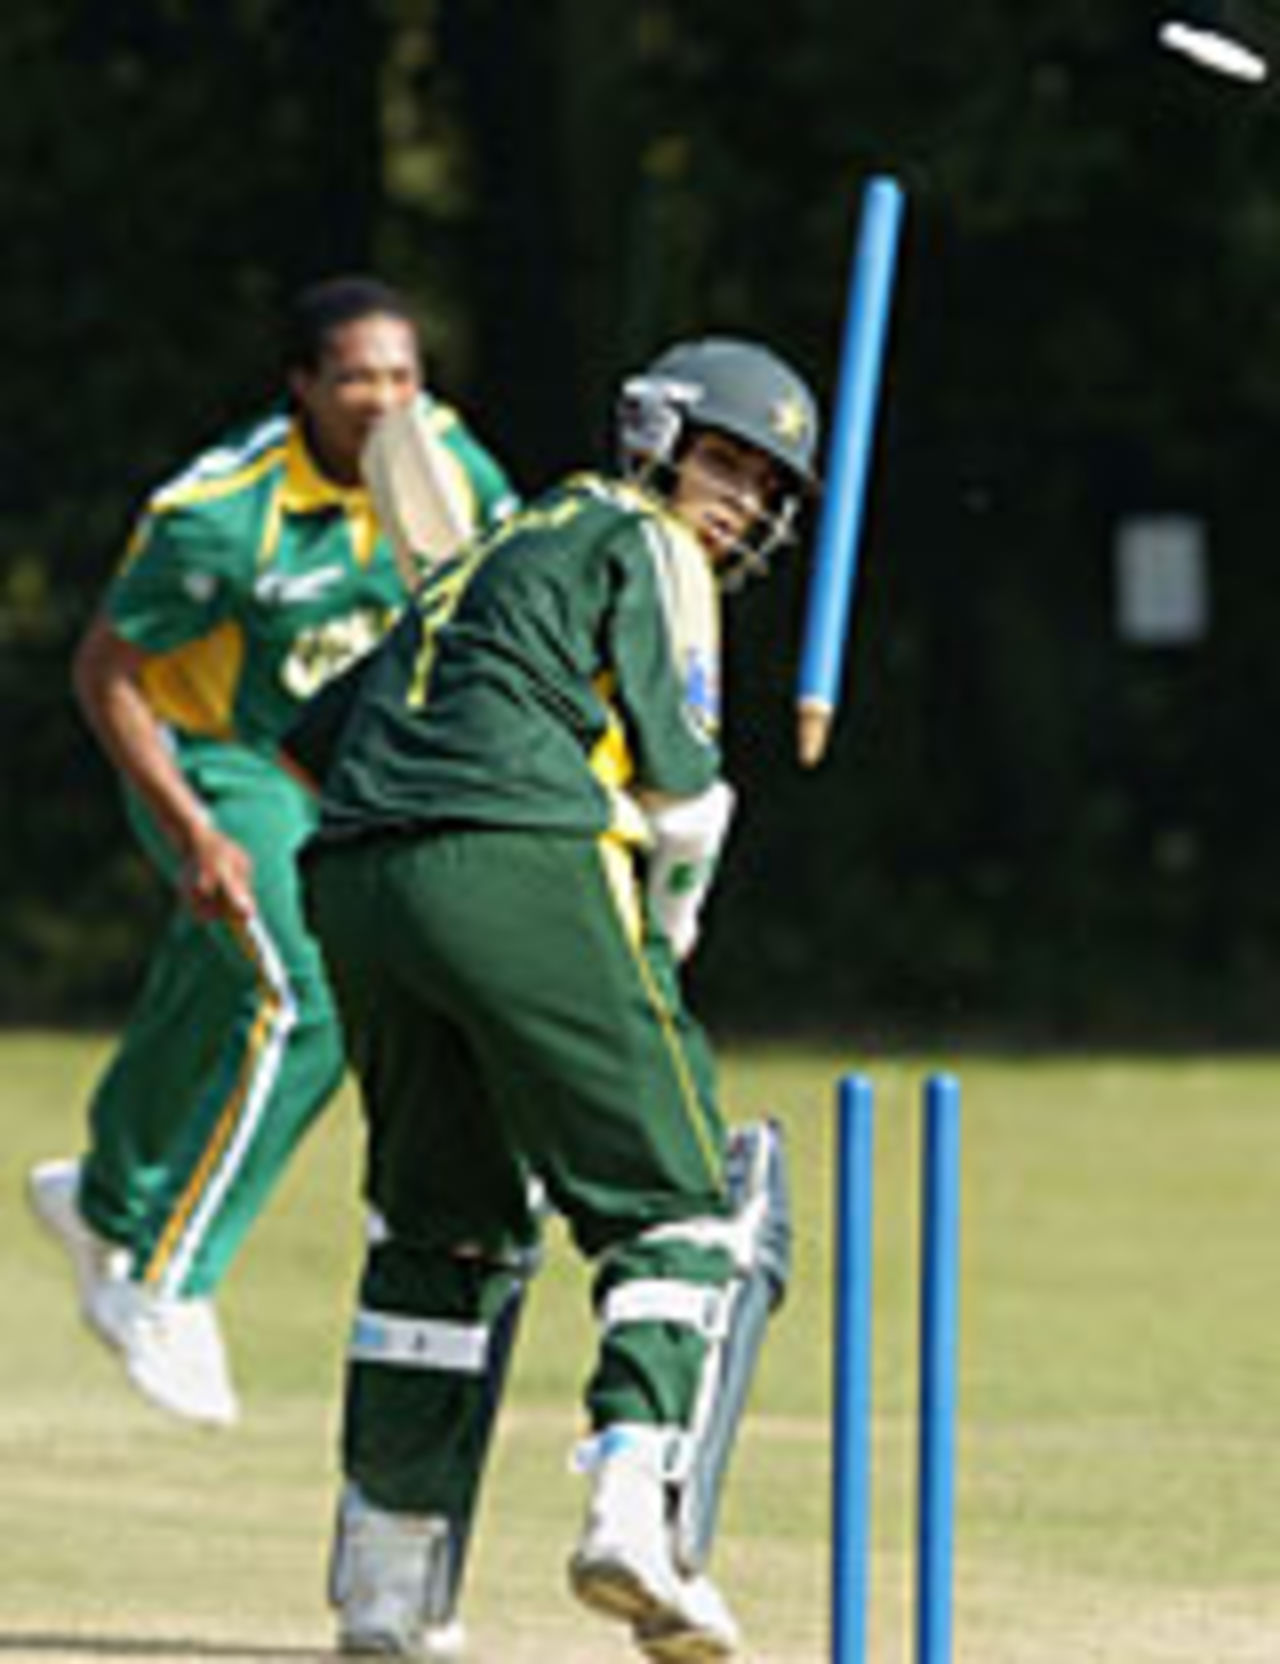 Salman Butt of Pakistan looks on after being bowled by Makhaya Ntini of South Africa during the friendly at Walmley Cricket Club, September 9, 2004